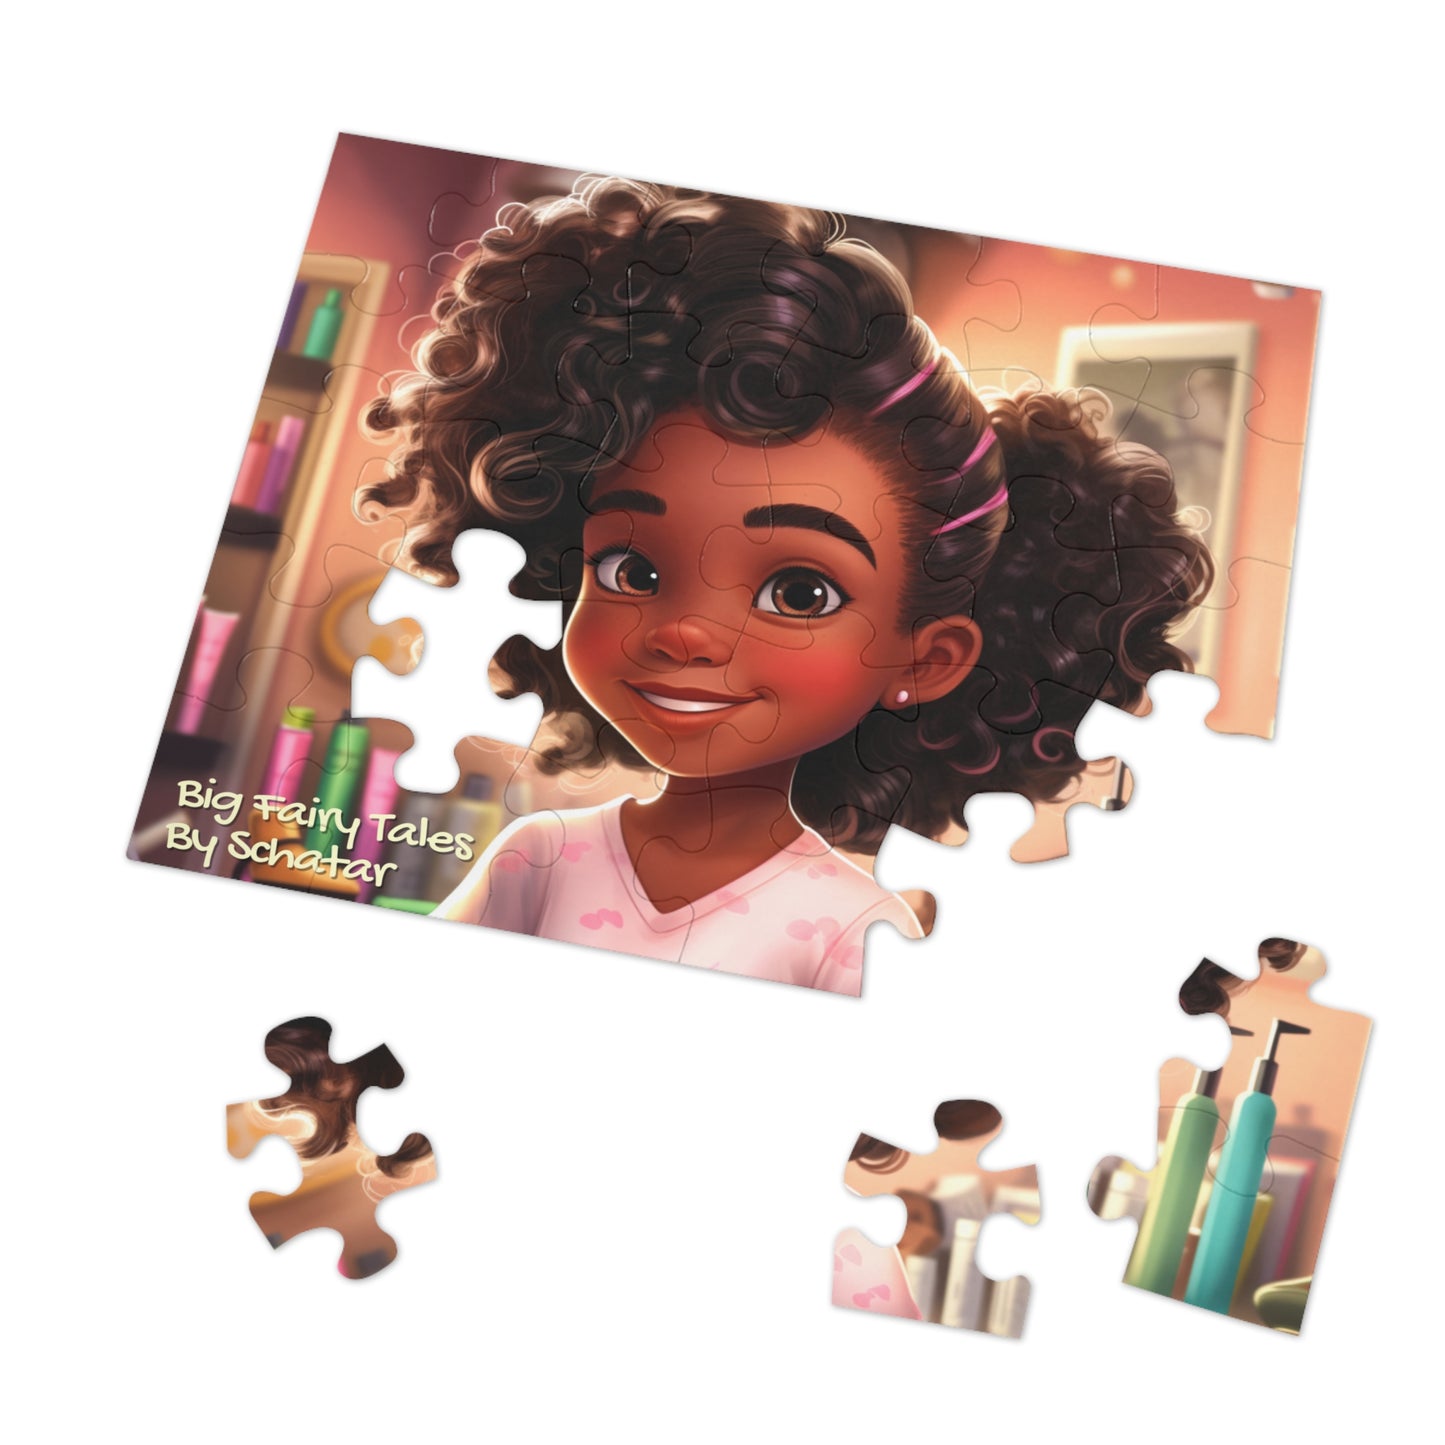 Beauty Shop Owner - Big Little Professionals Puzzle 18 From Big Fairy Tales By Schatar